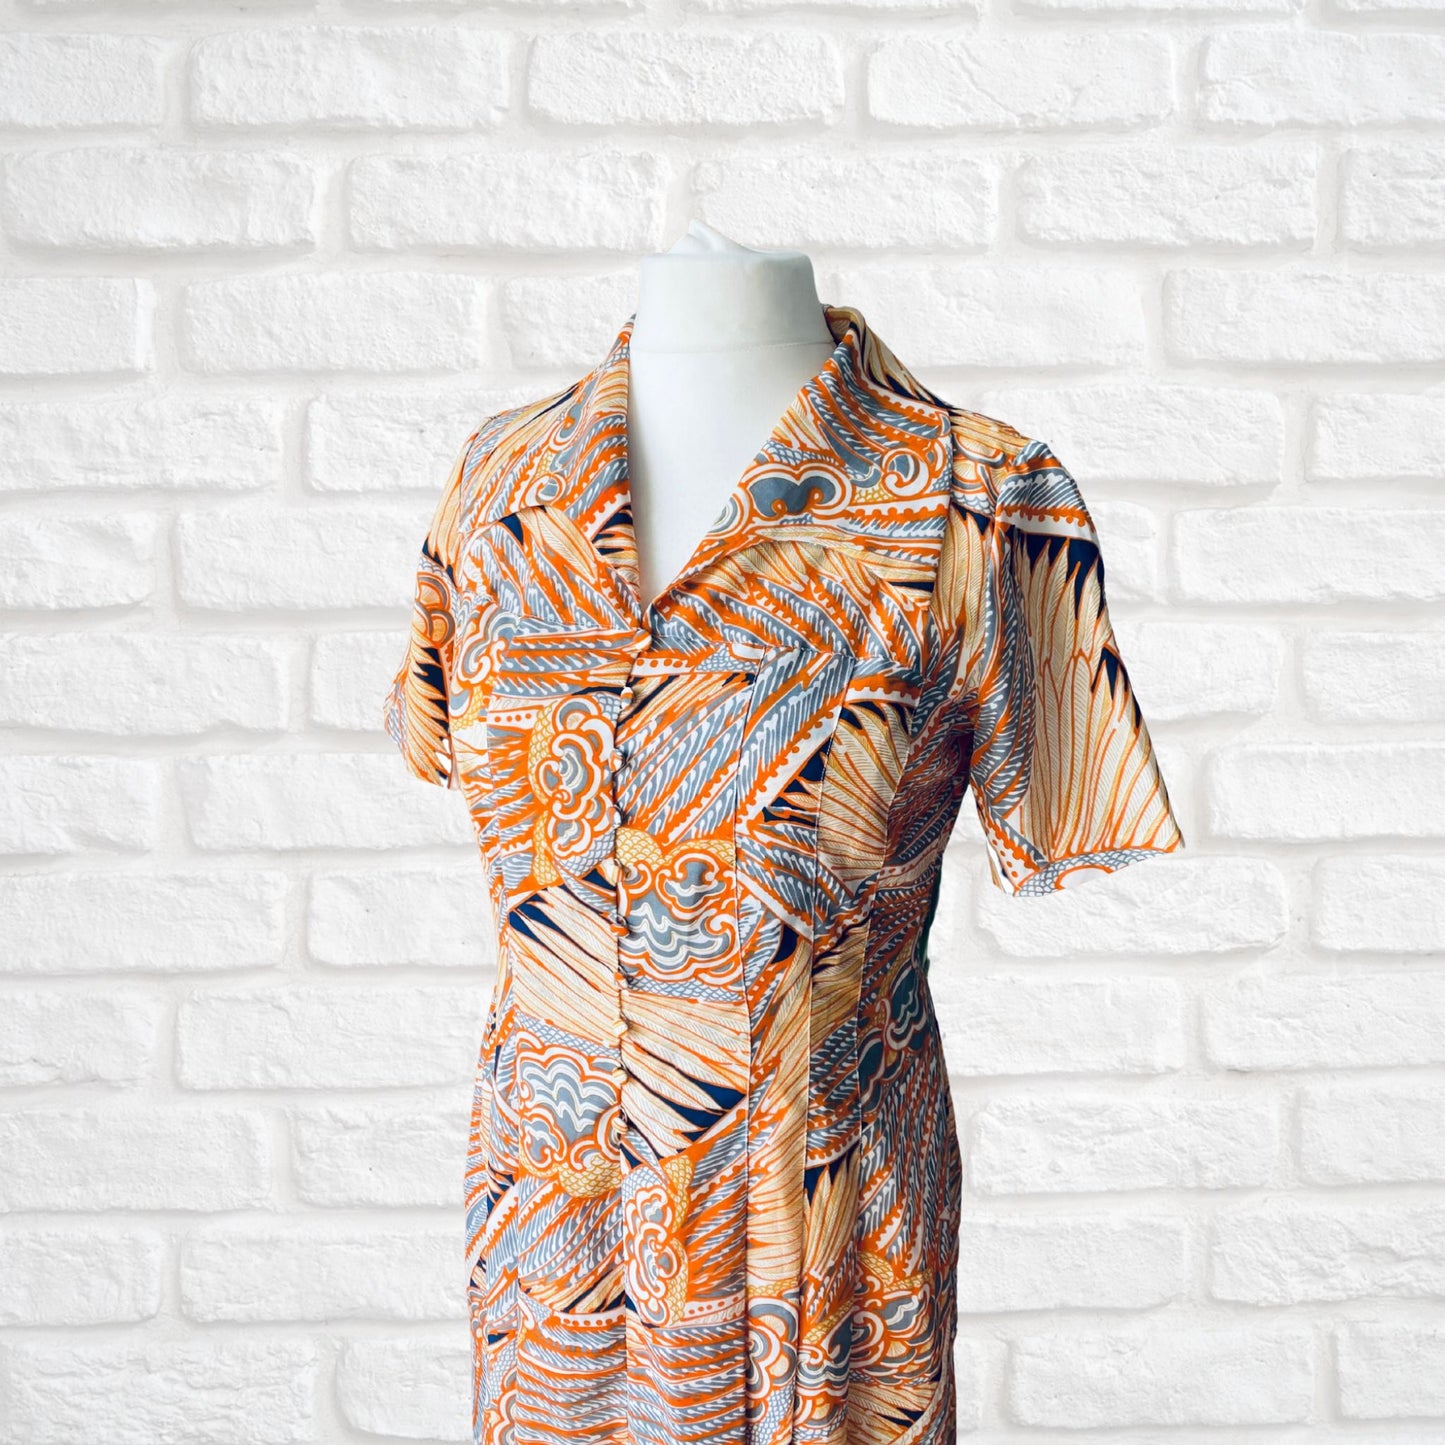 1970s Orange, Grey, and White Abstract Print Midi Dress - Vintage Shirt Waister Style. Approx UK size 14-16